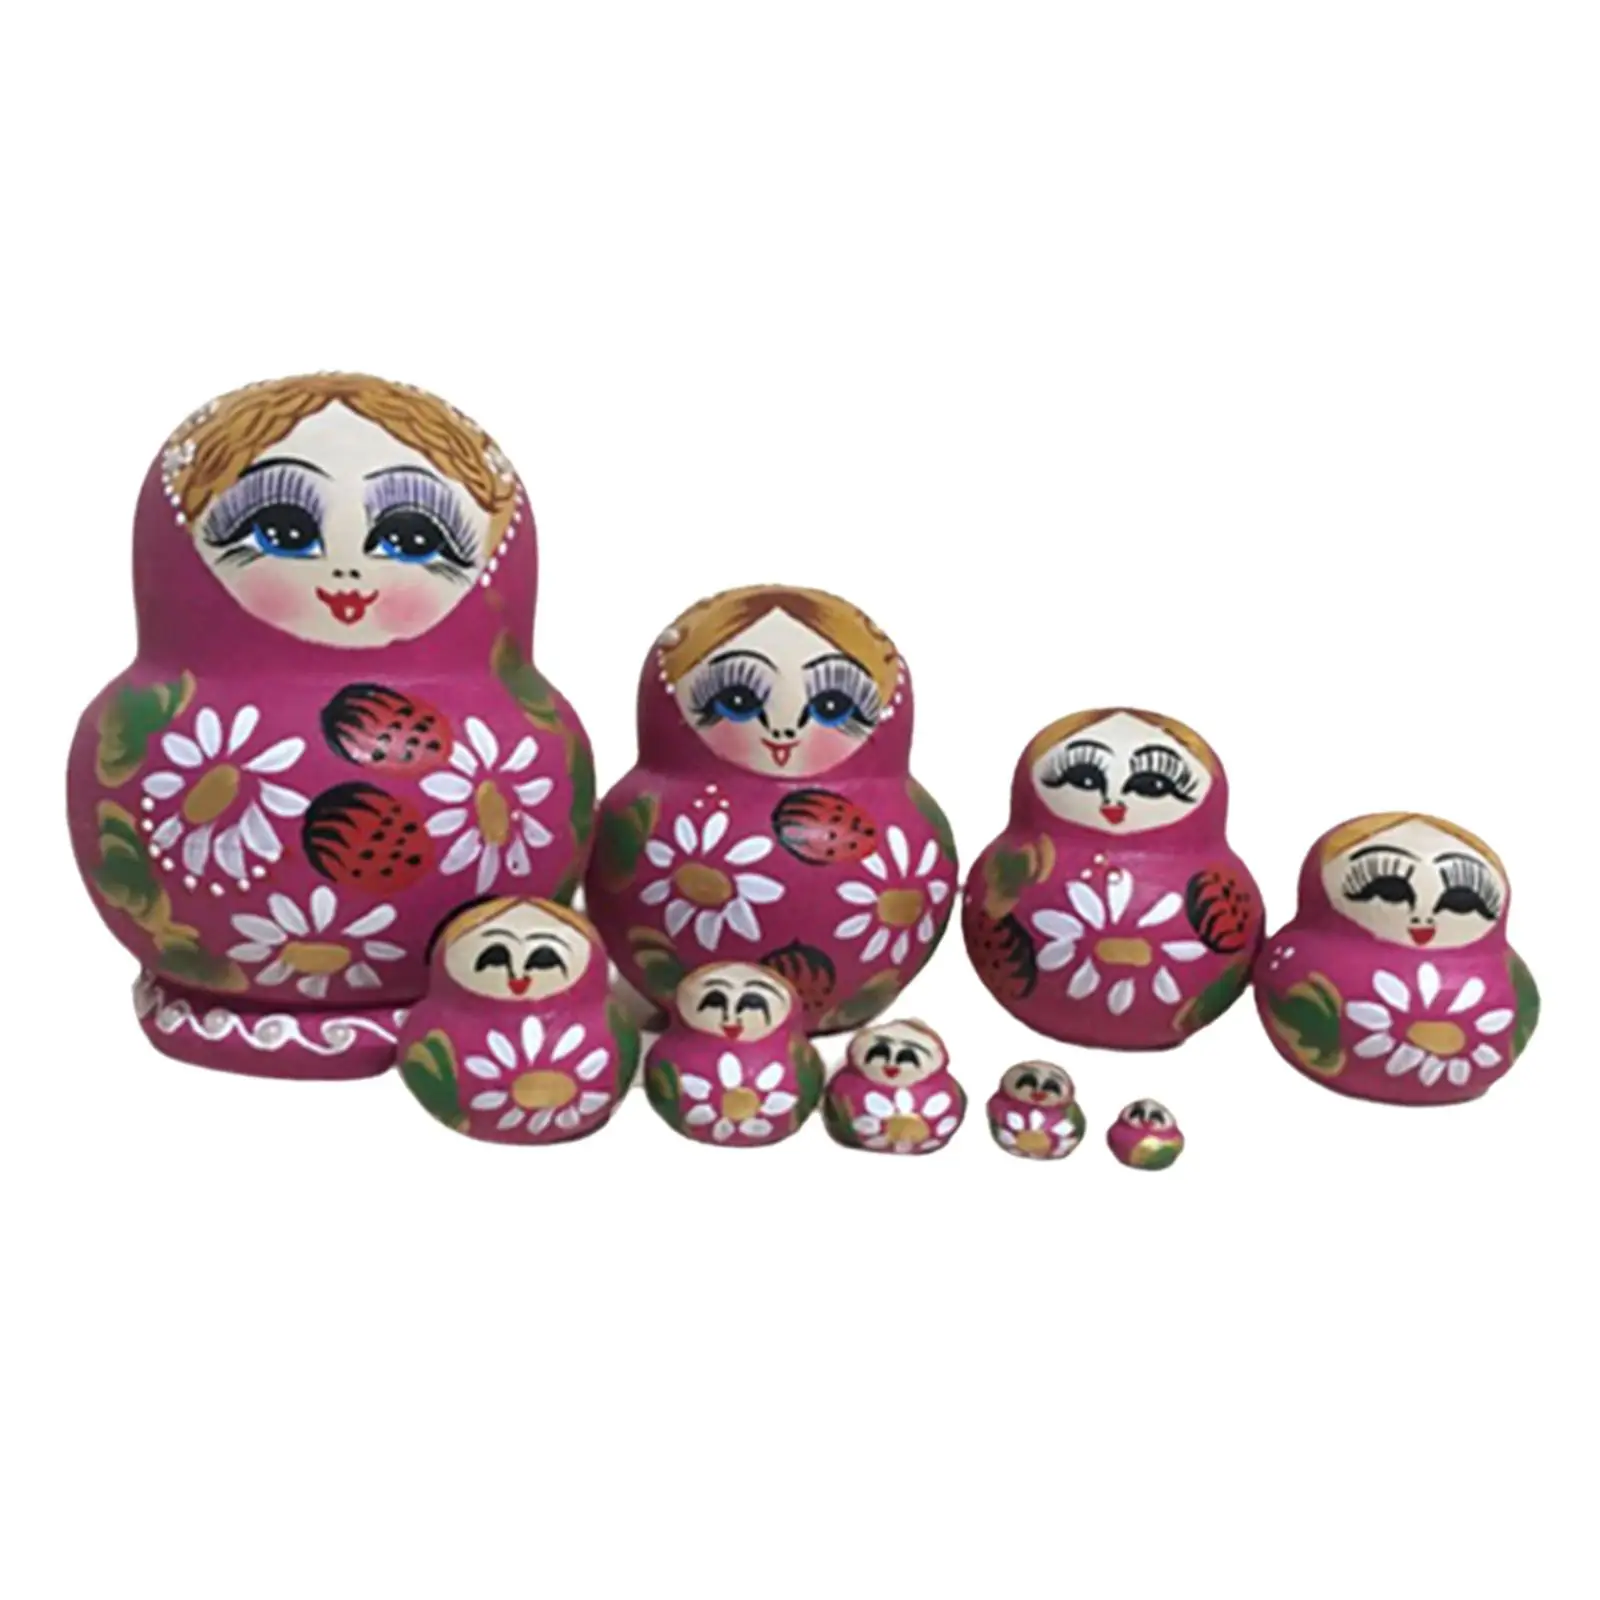 

10x Wooden Russian Nesting Doll Figures Handmade Nesting Wishing Dolls Stacking for Office Birthday Gift Home Easter Decoration